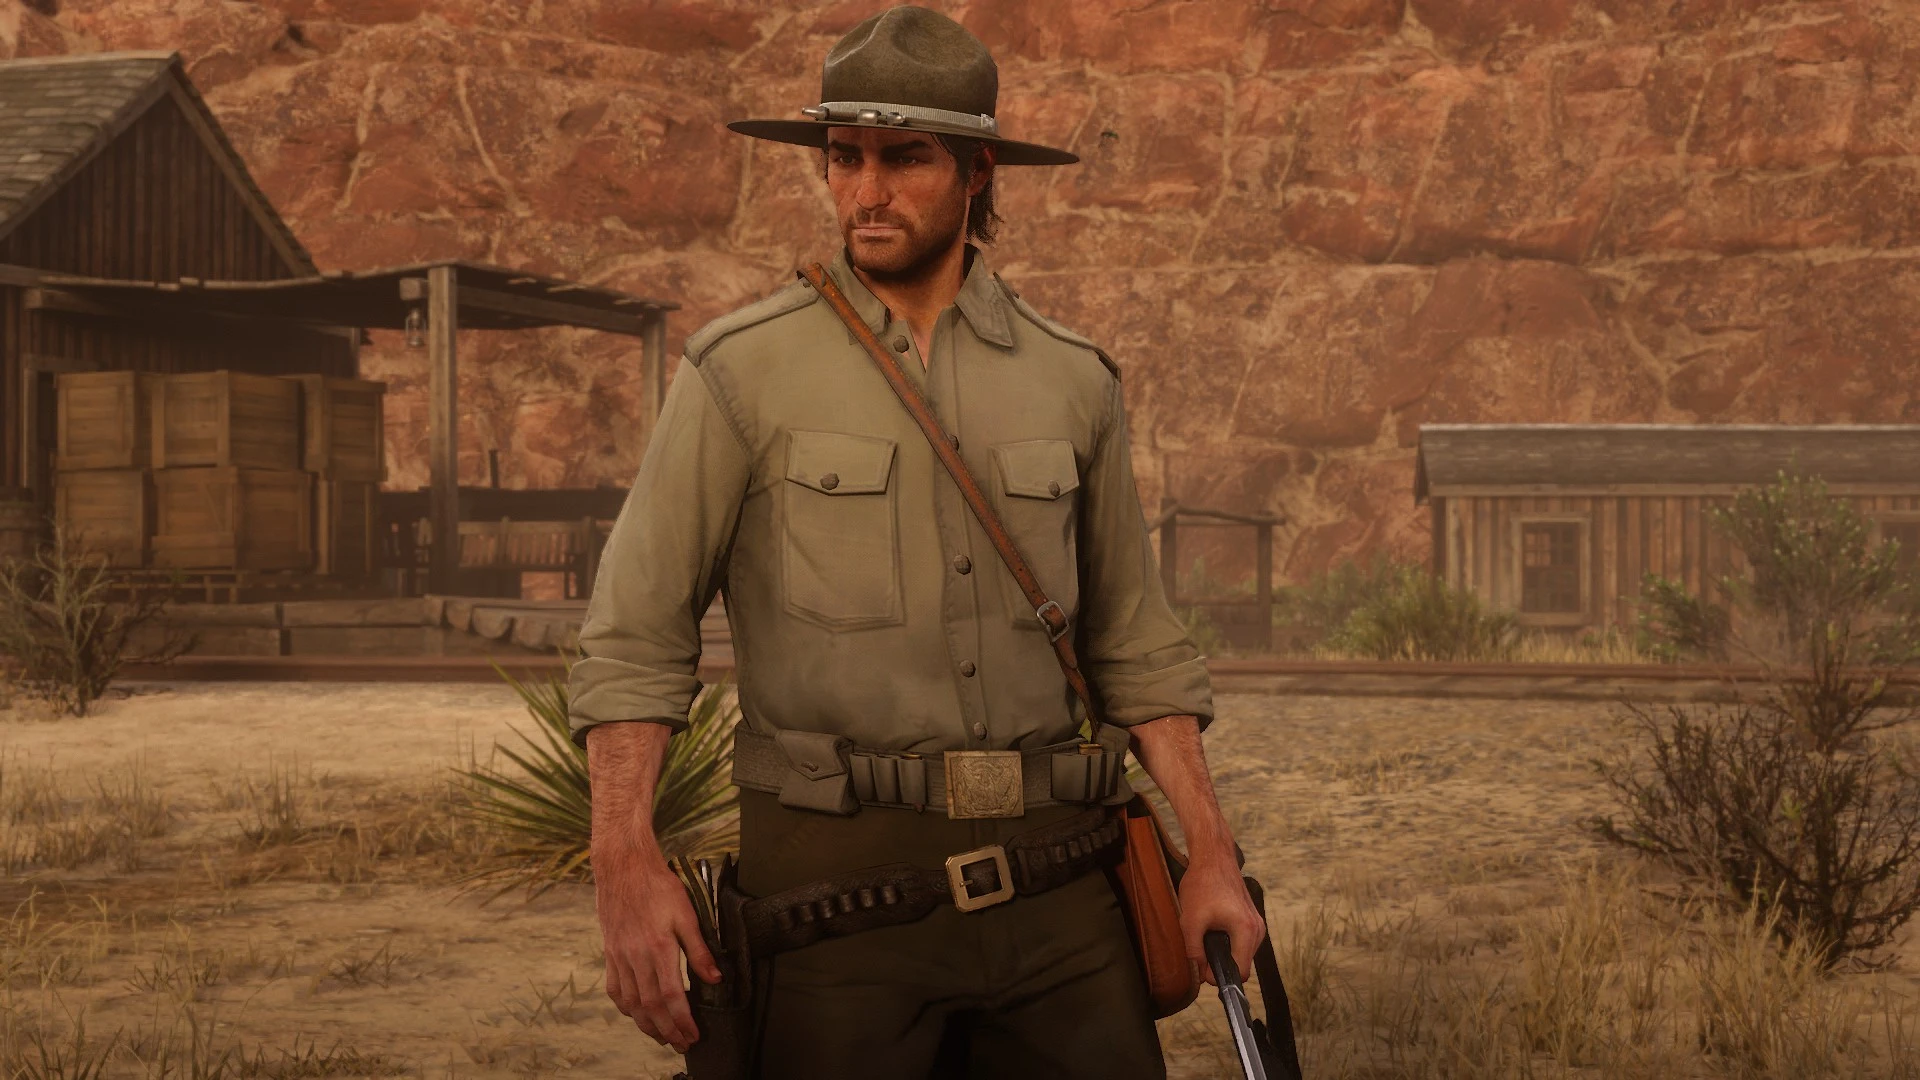 US Army Uniform Rdr1 at Red Dead Redemption 2 Nexus - Mods and community